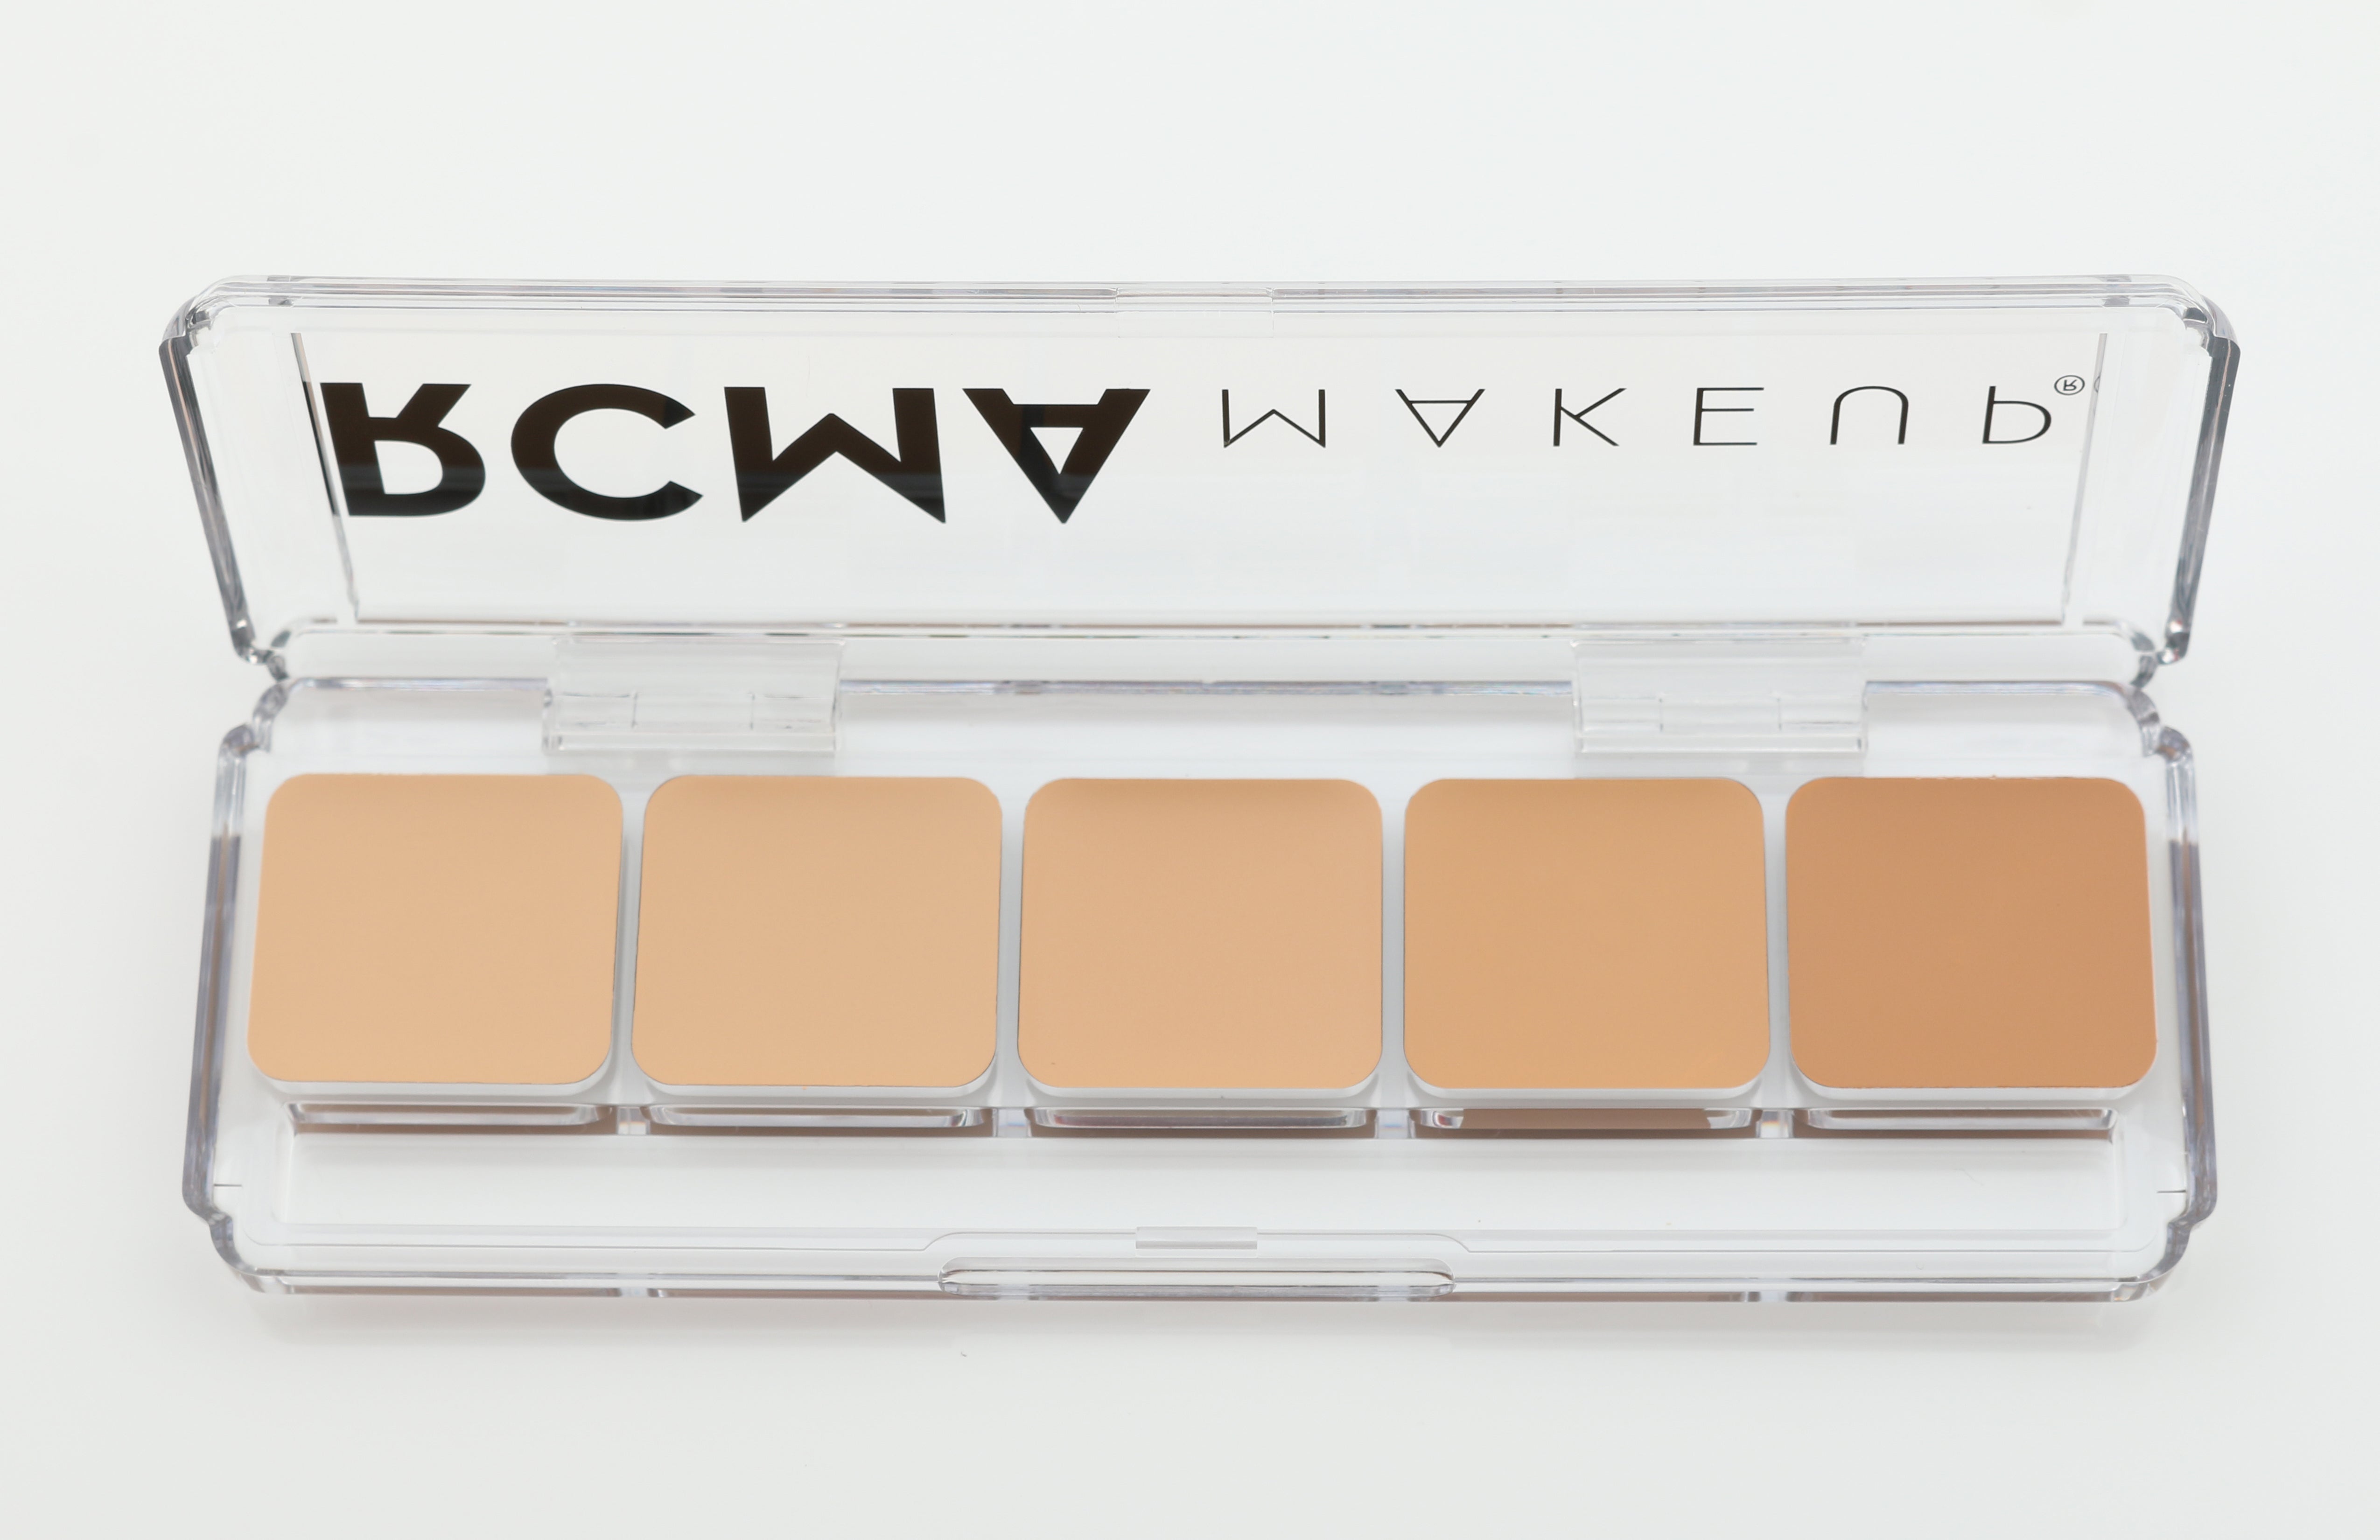 RCMA: The Best Makeup Brand You've Probably Never Heard Of